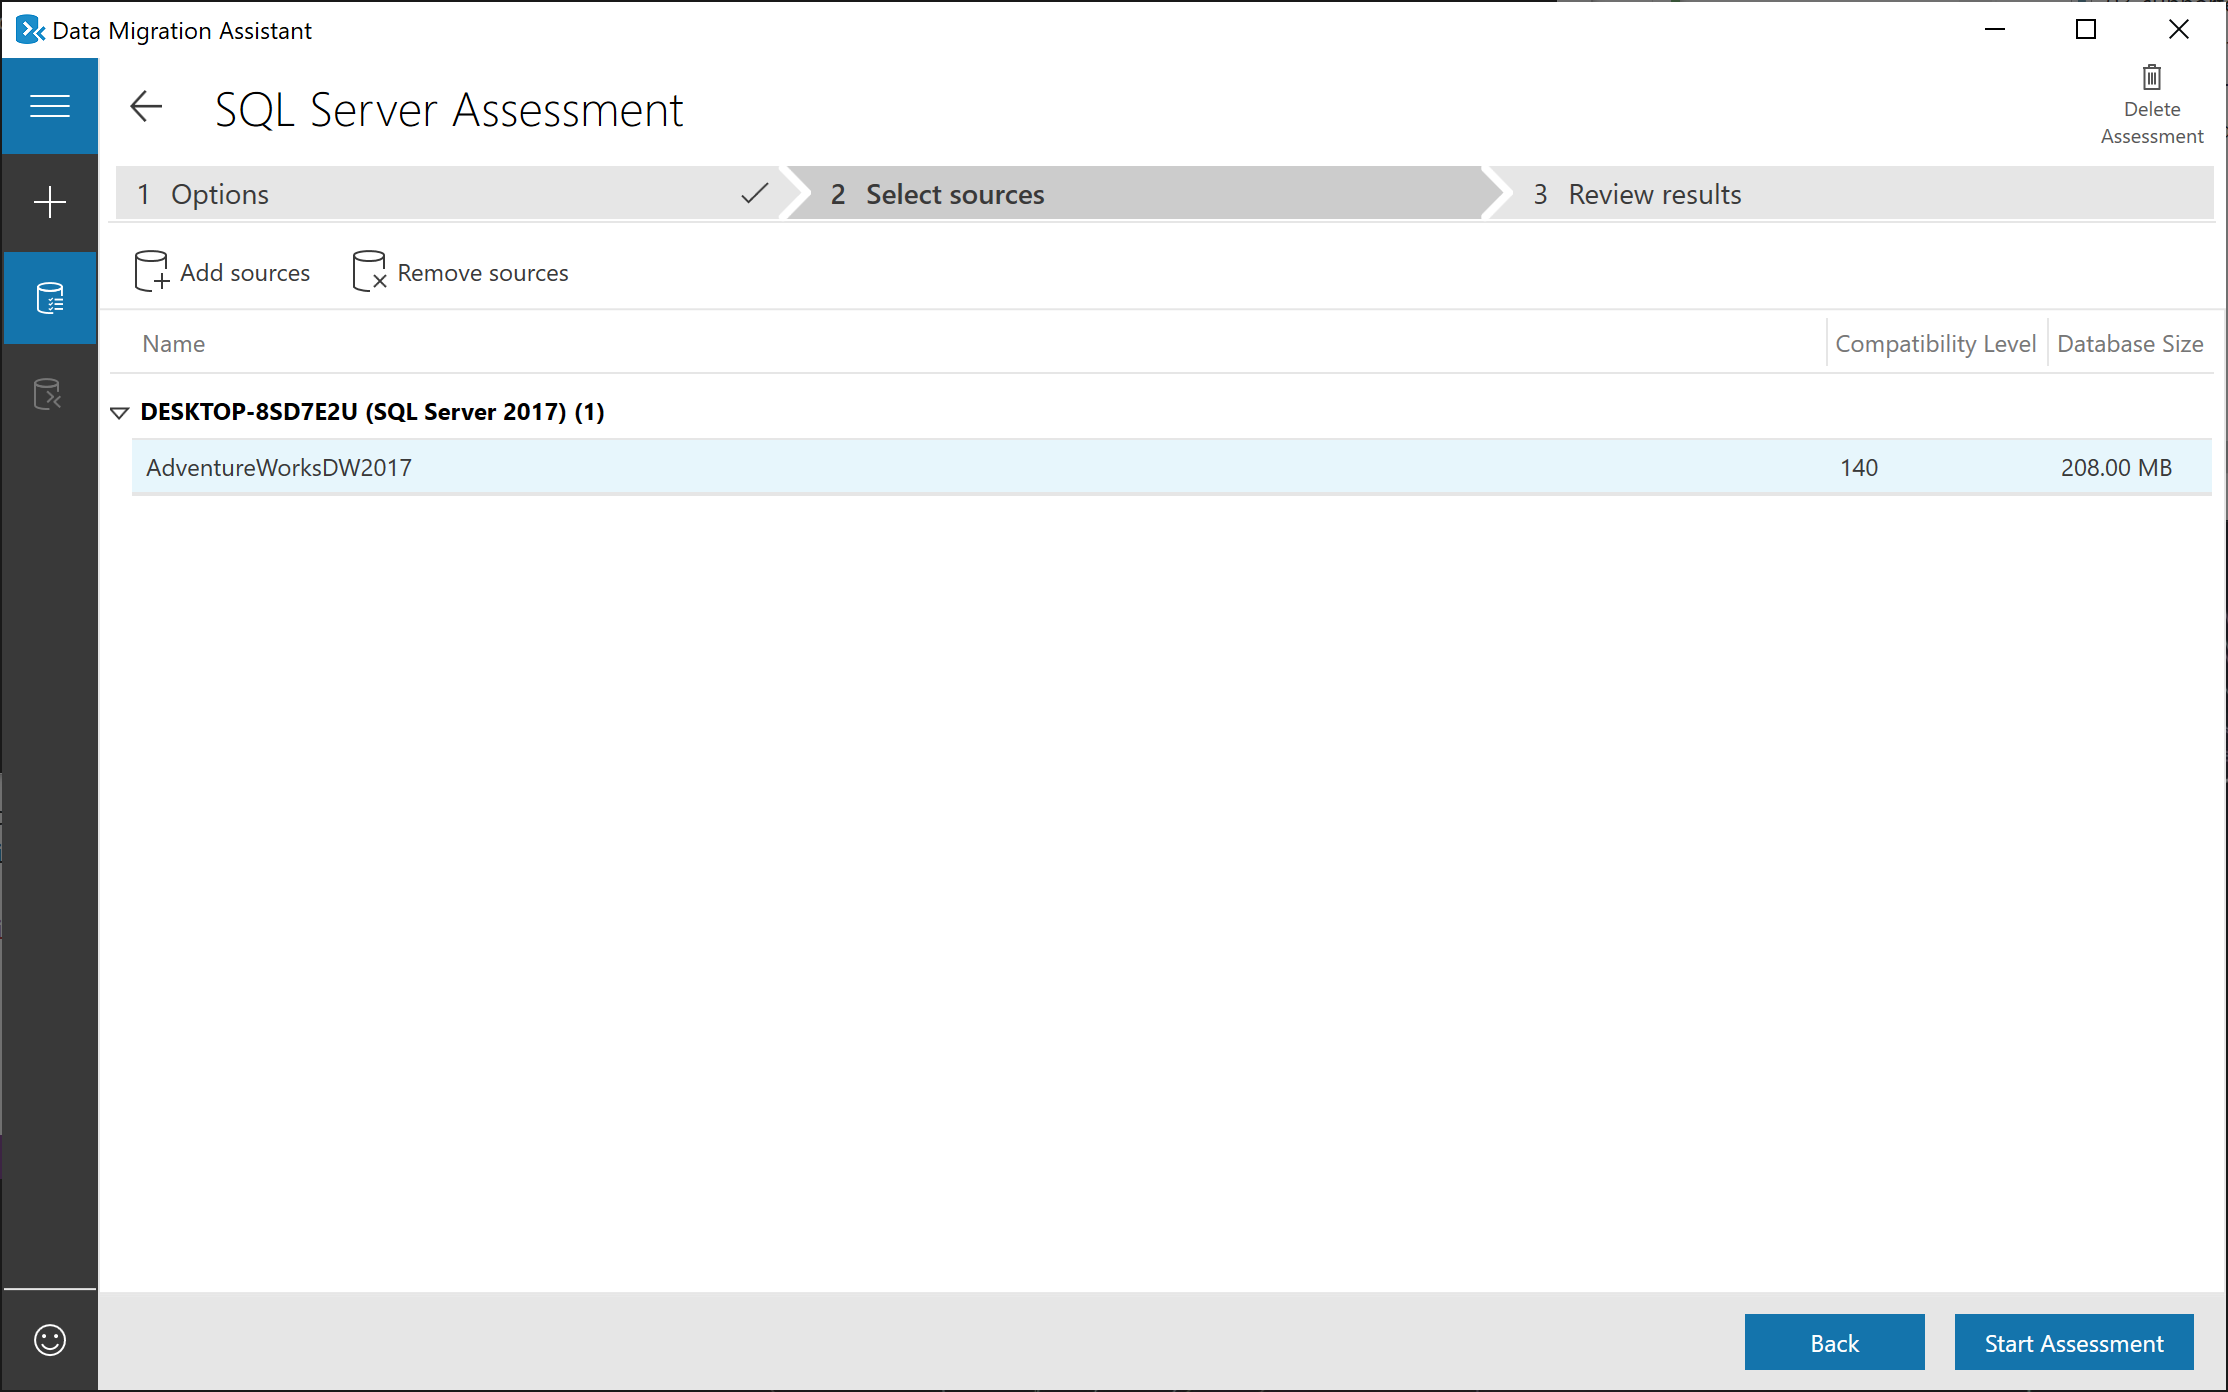 Choosing the assessment options in the Data Migration Assistant